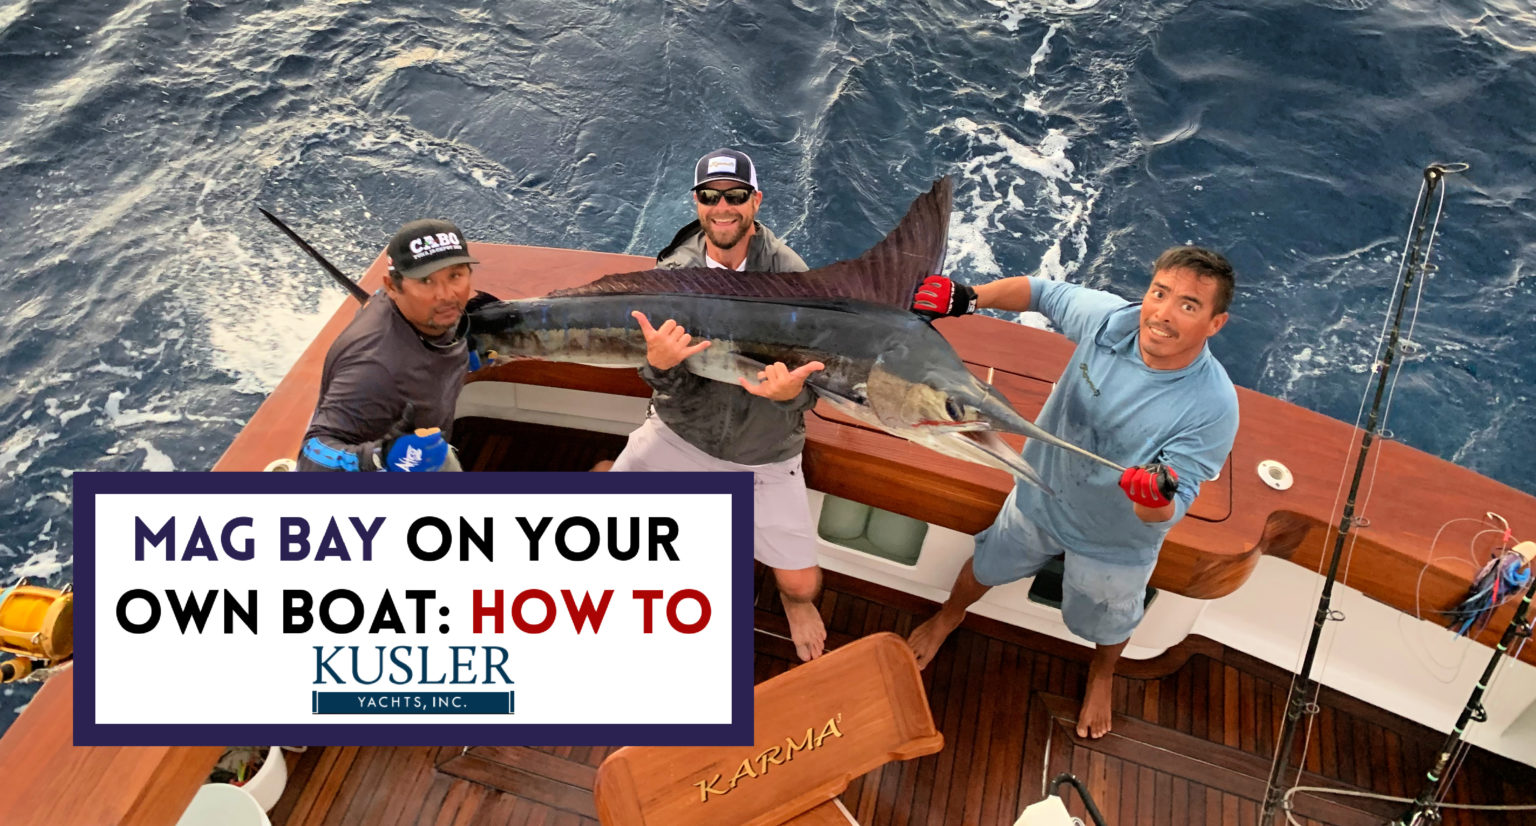 Kusler Yachts Guide to Fishing Mag Bay on Your Own Boat.